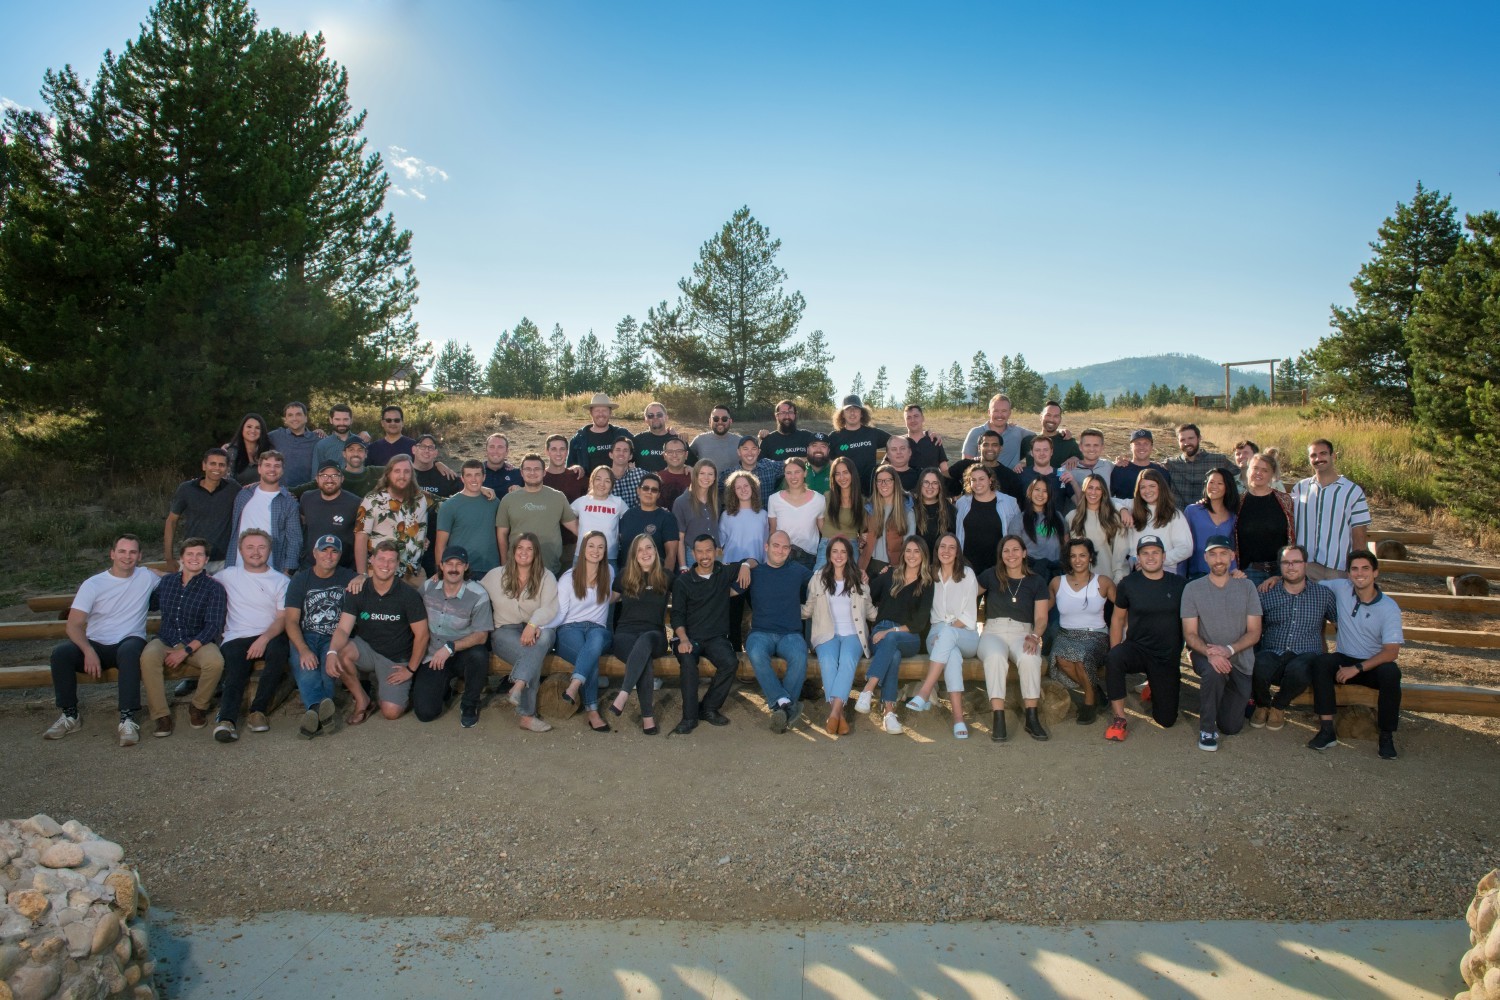 The full Skuad came together in Winter Park, CO for our annual retreat, enjoying a weekend full of activities & bonding